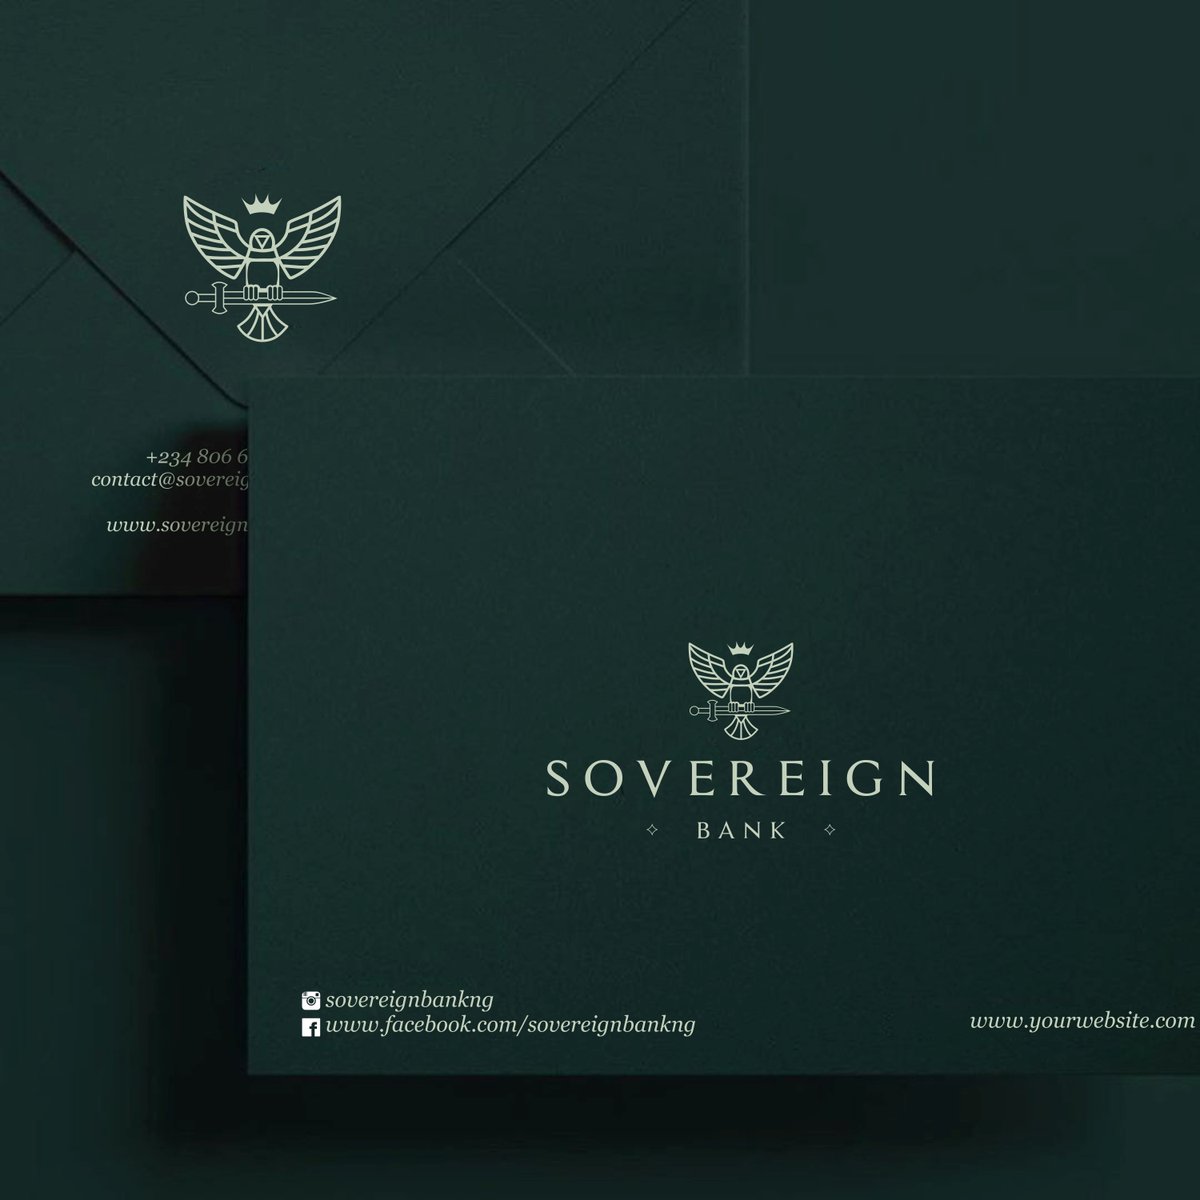 SOVEREIGNThis is a glorious and rich brand, built for success, that excel in financial matters. It's suffix is rich, smart, safe, trusted, sophisticated and allows it to roll peacefully in the heart of her customers.